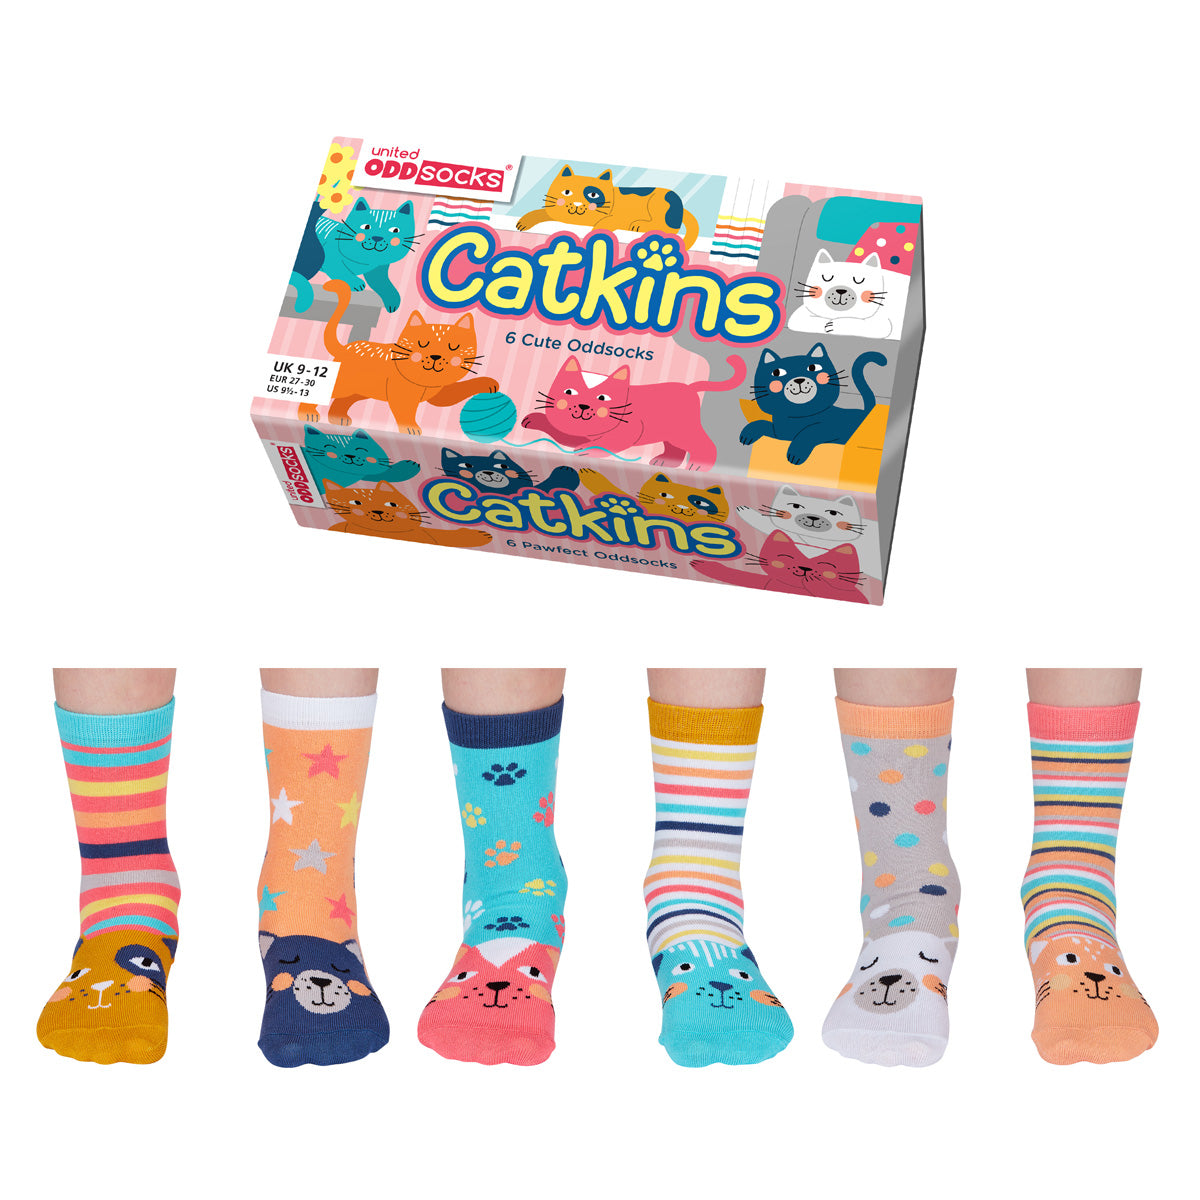 Socks for 4 to 8 years - Catkins